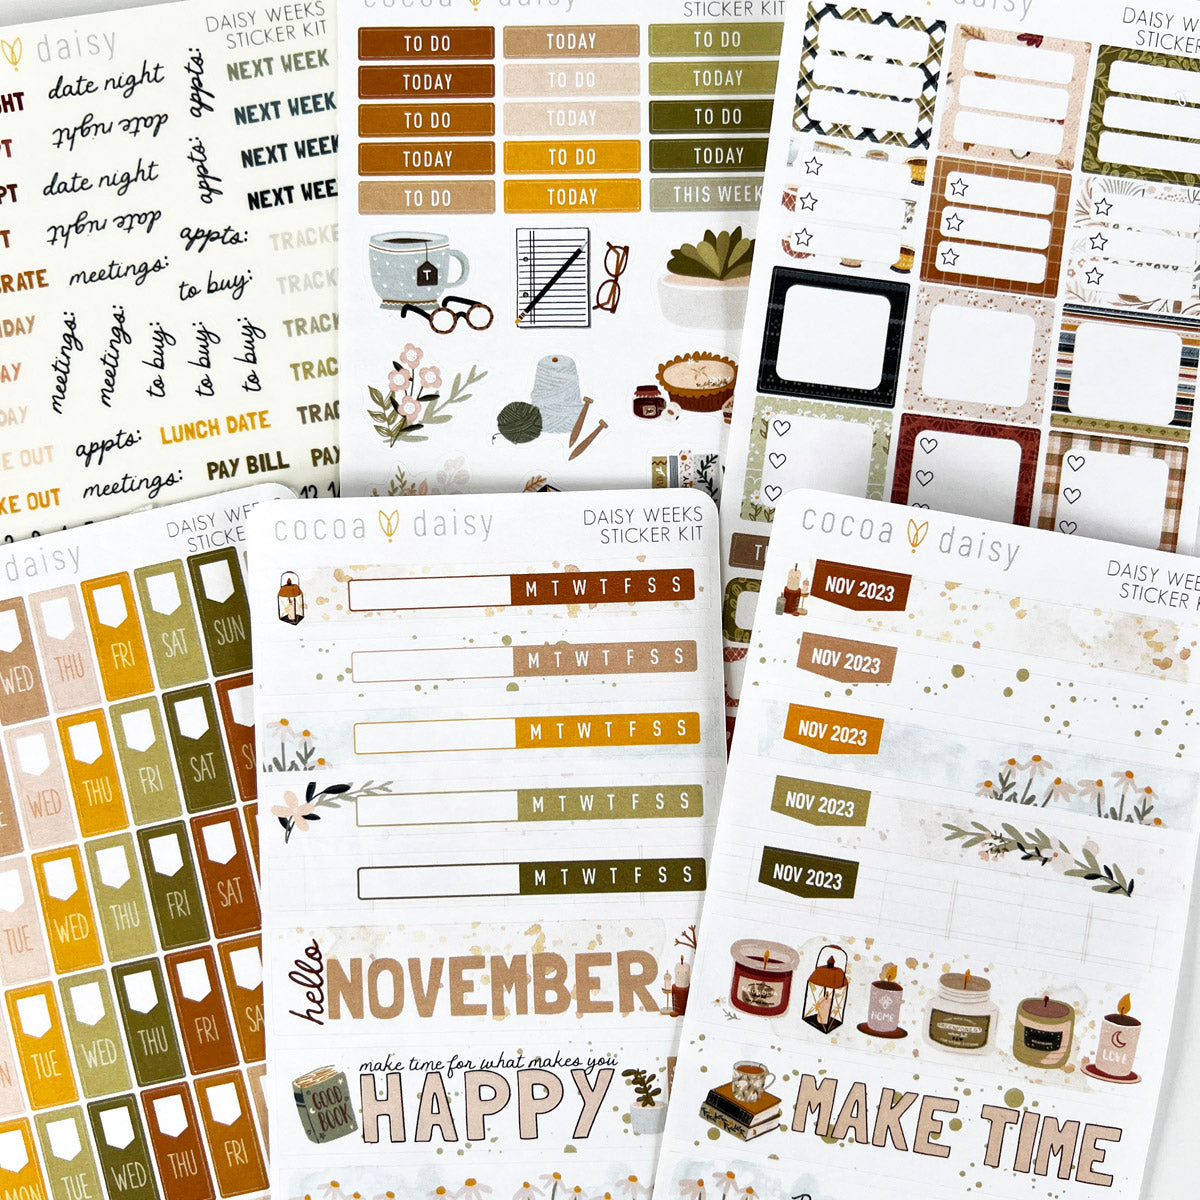 The Minimalist Collection Days of the Week Sticker Sheet – Cocoa Daisy